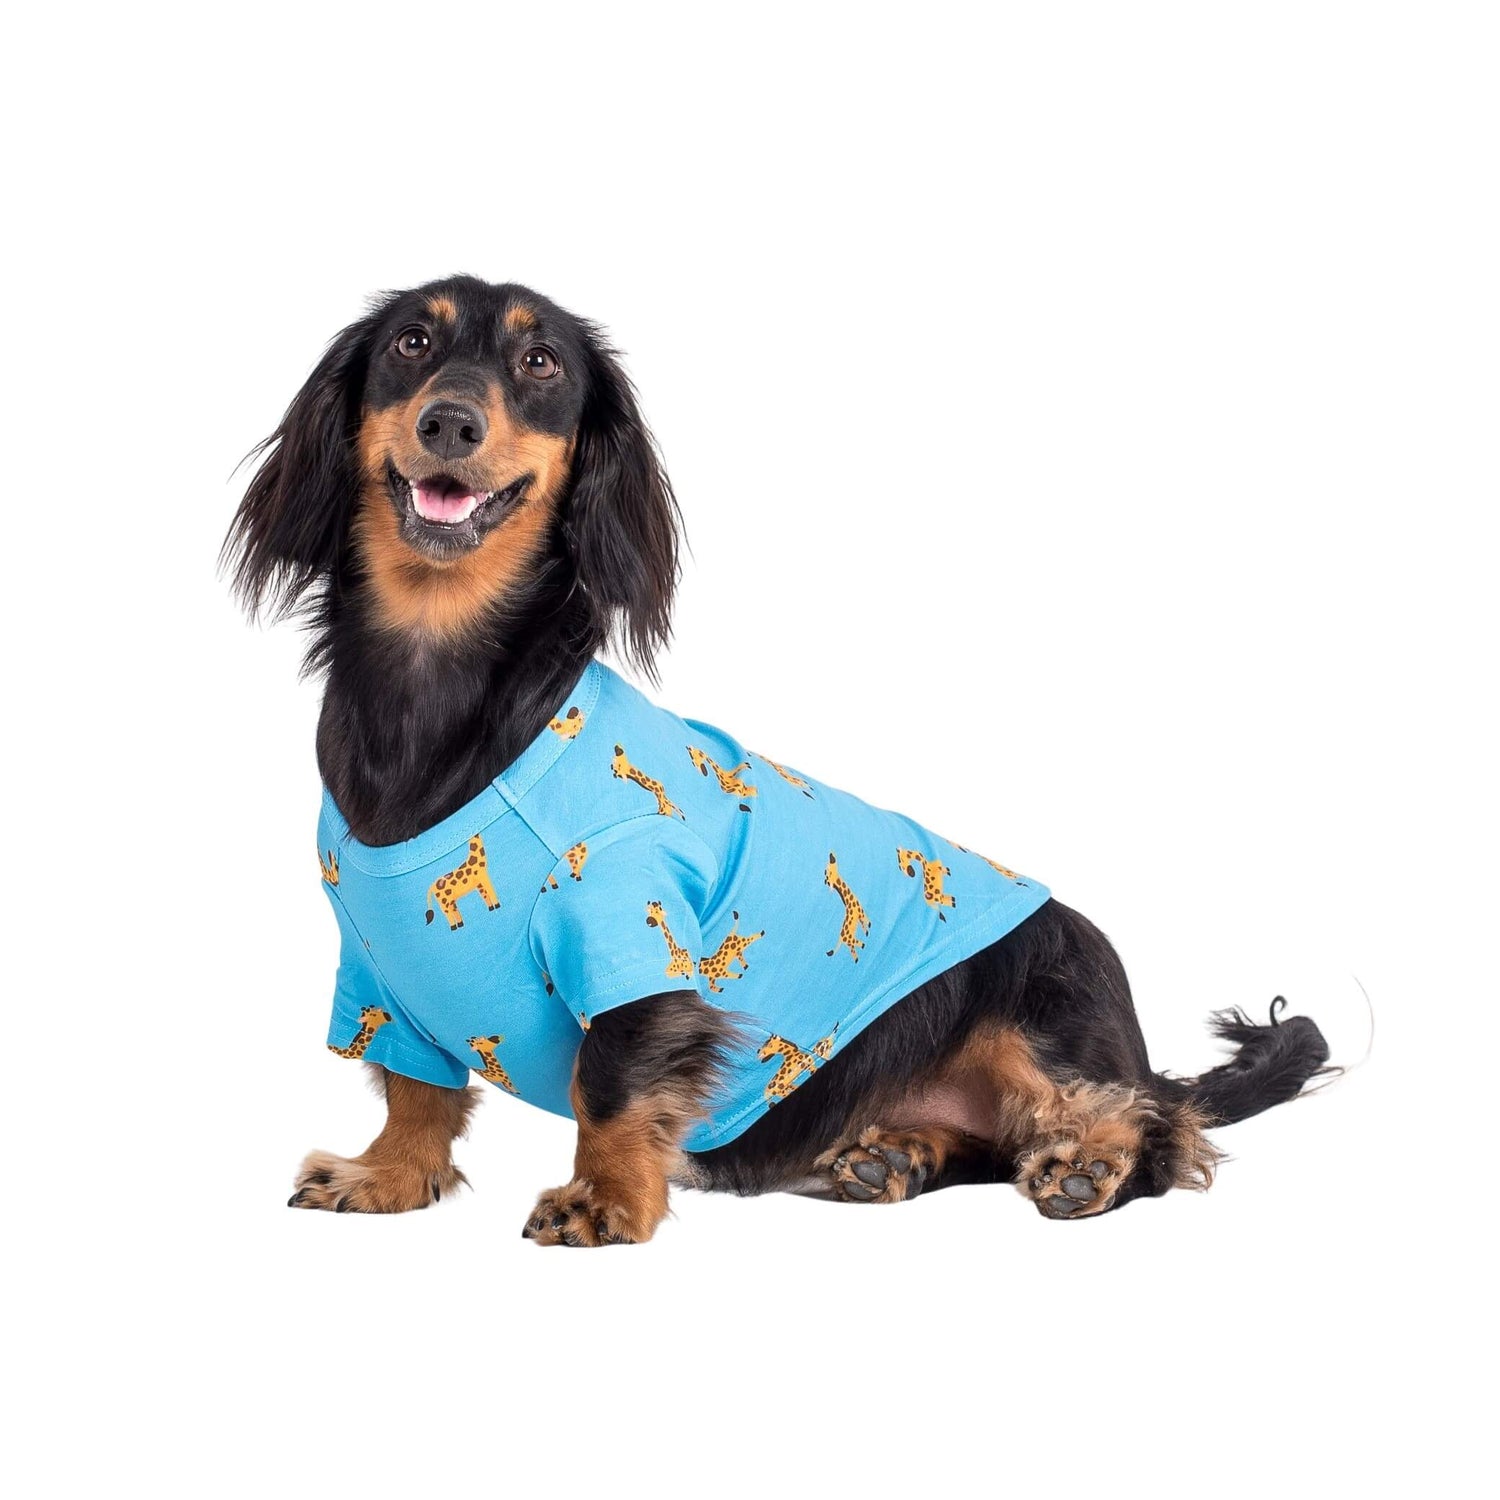 Ellie the Dachshund wearing Gerald the Giraffe dog pyjamas made by Vibrant Hound. The dog pyjamas are blue, with girrafes printed on them.